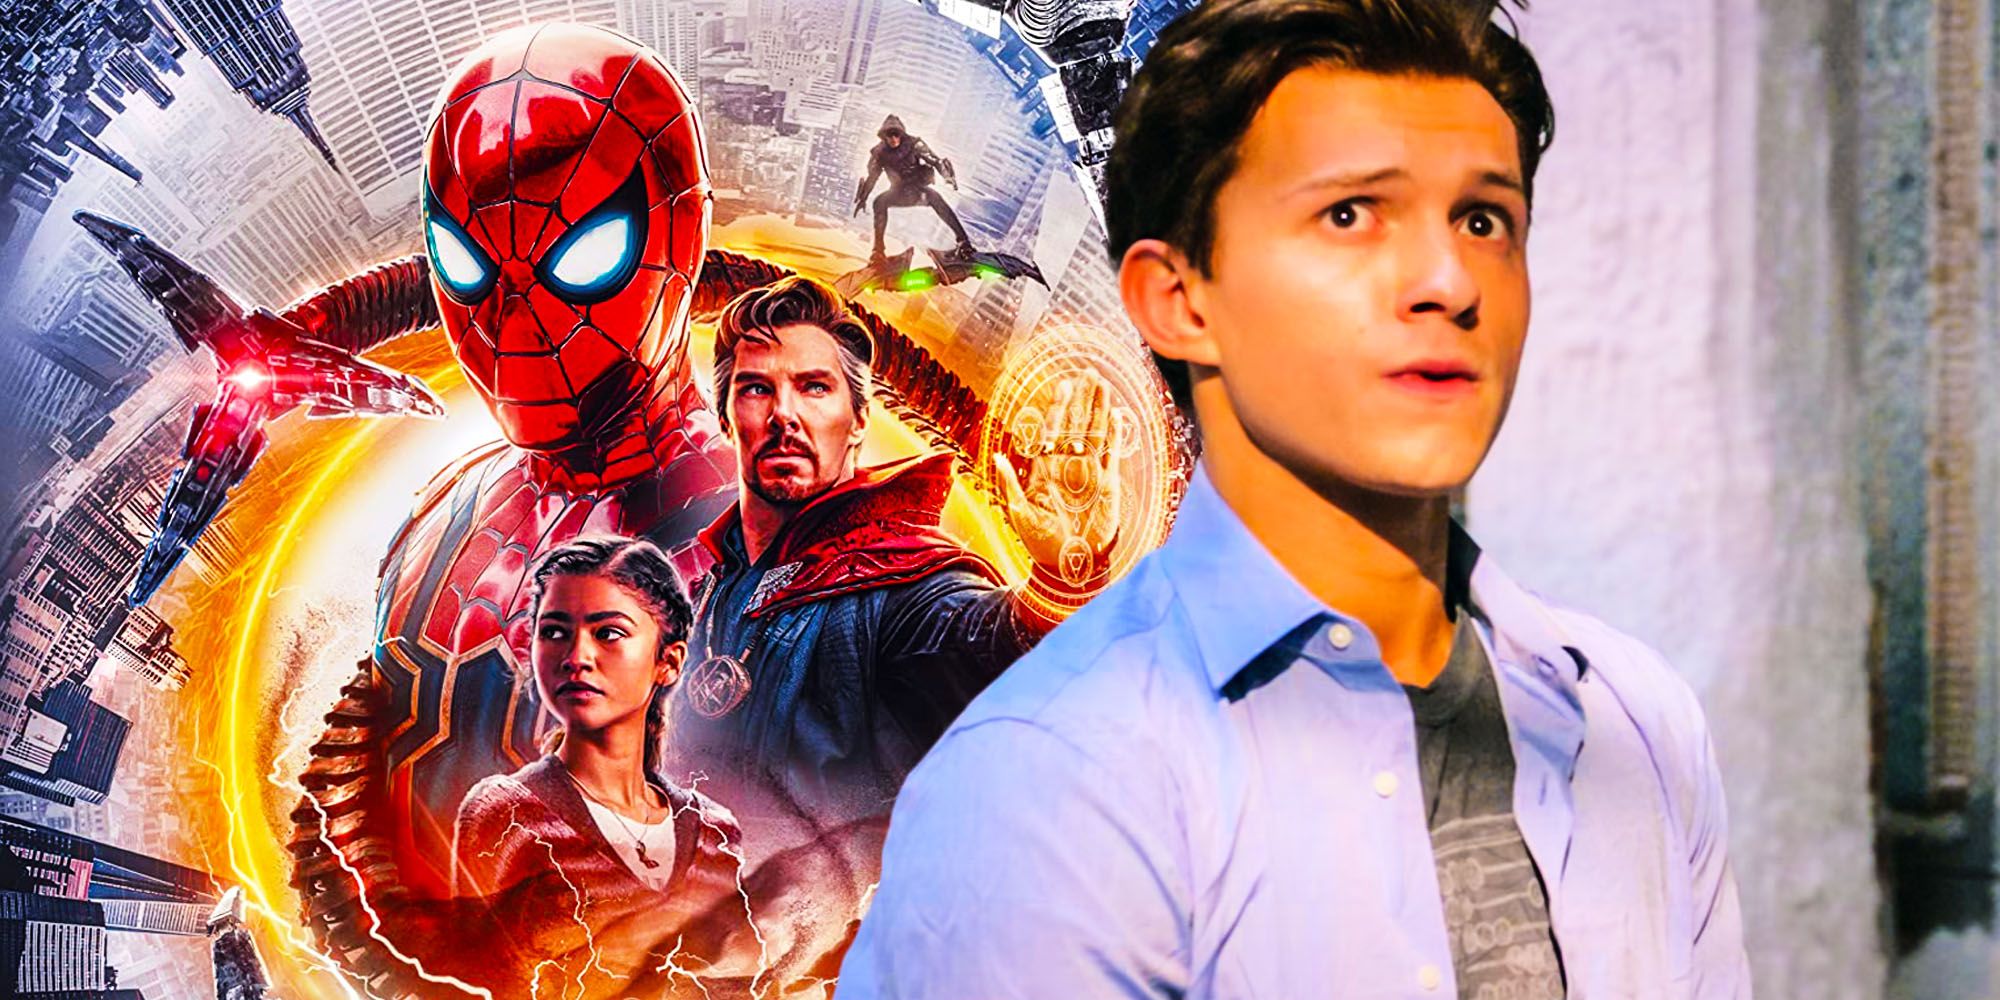 Spiderman no way home box office smashed expectations and records tom holland